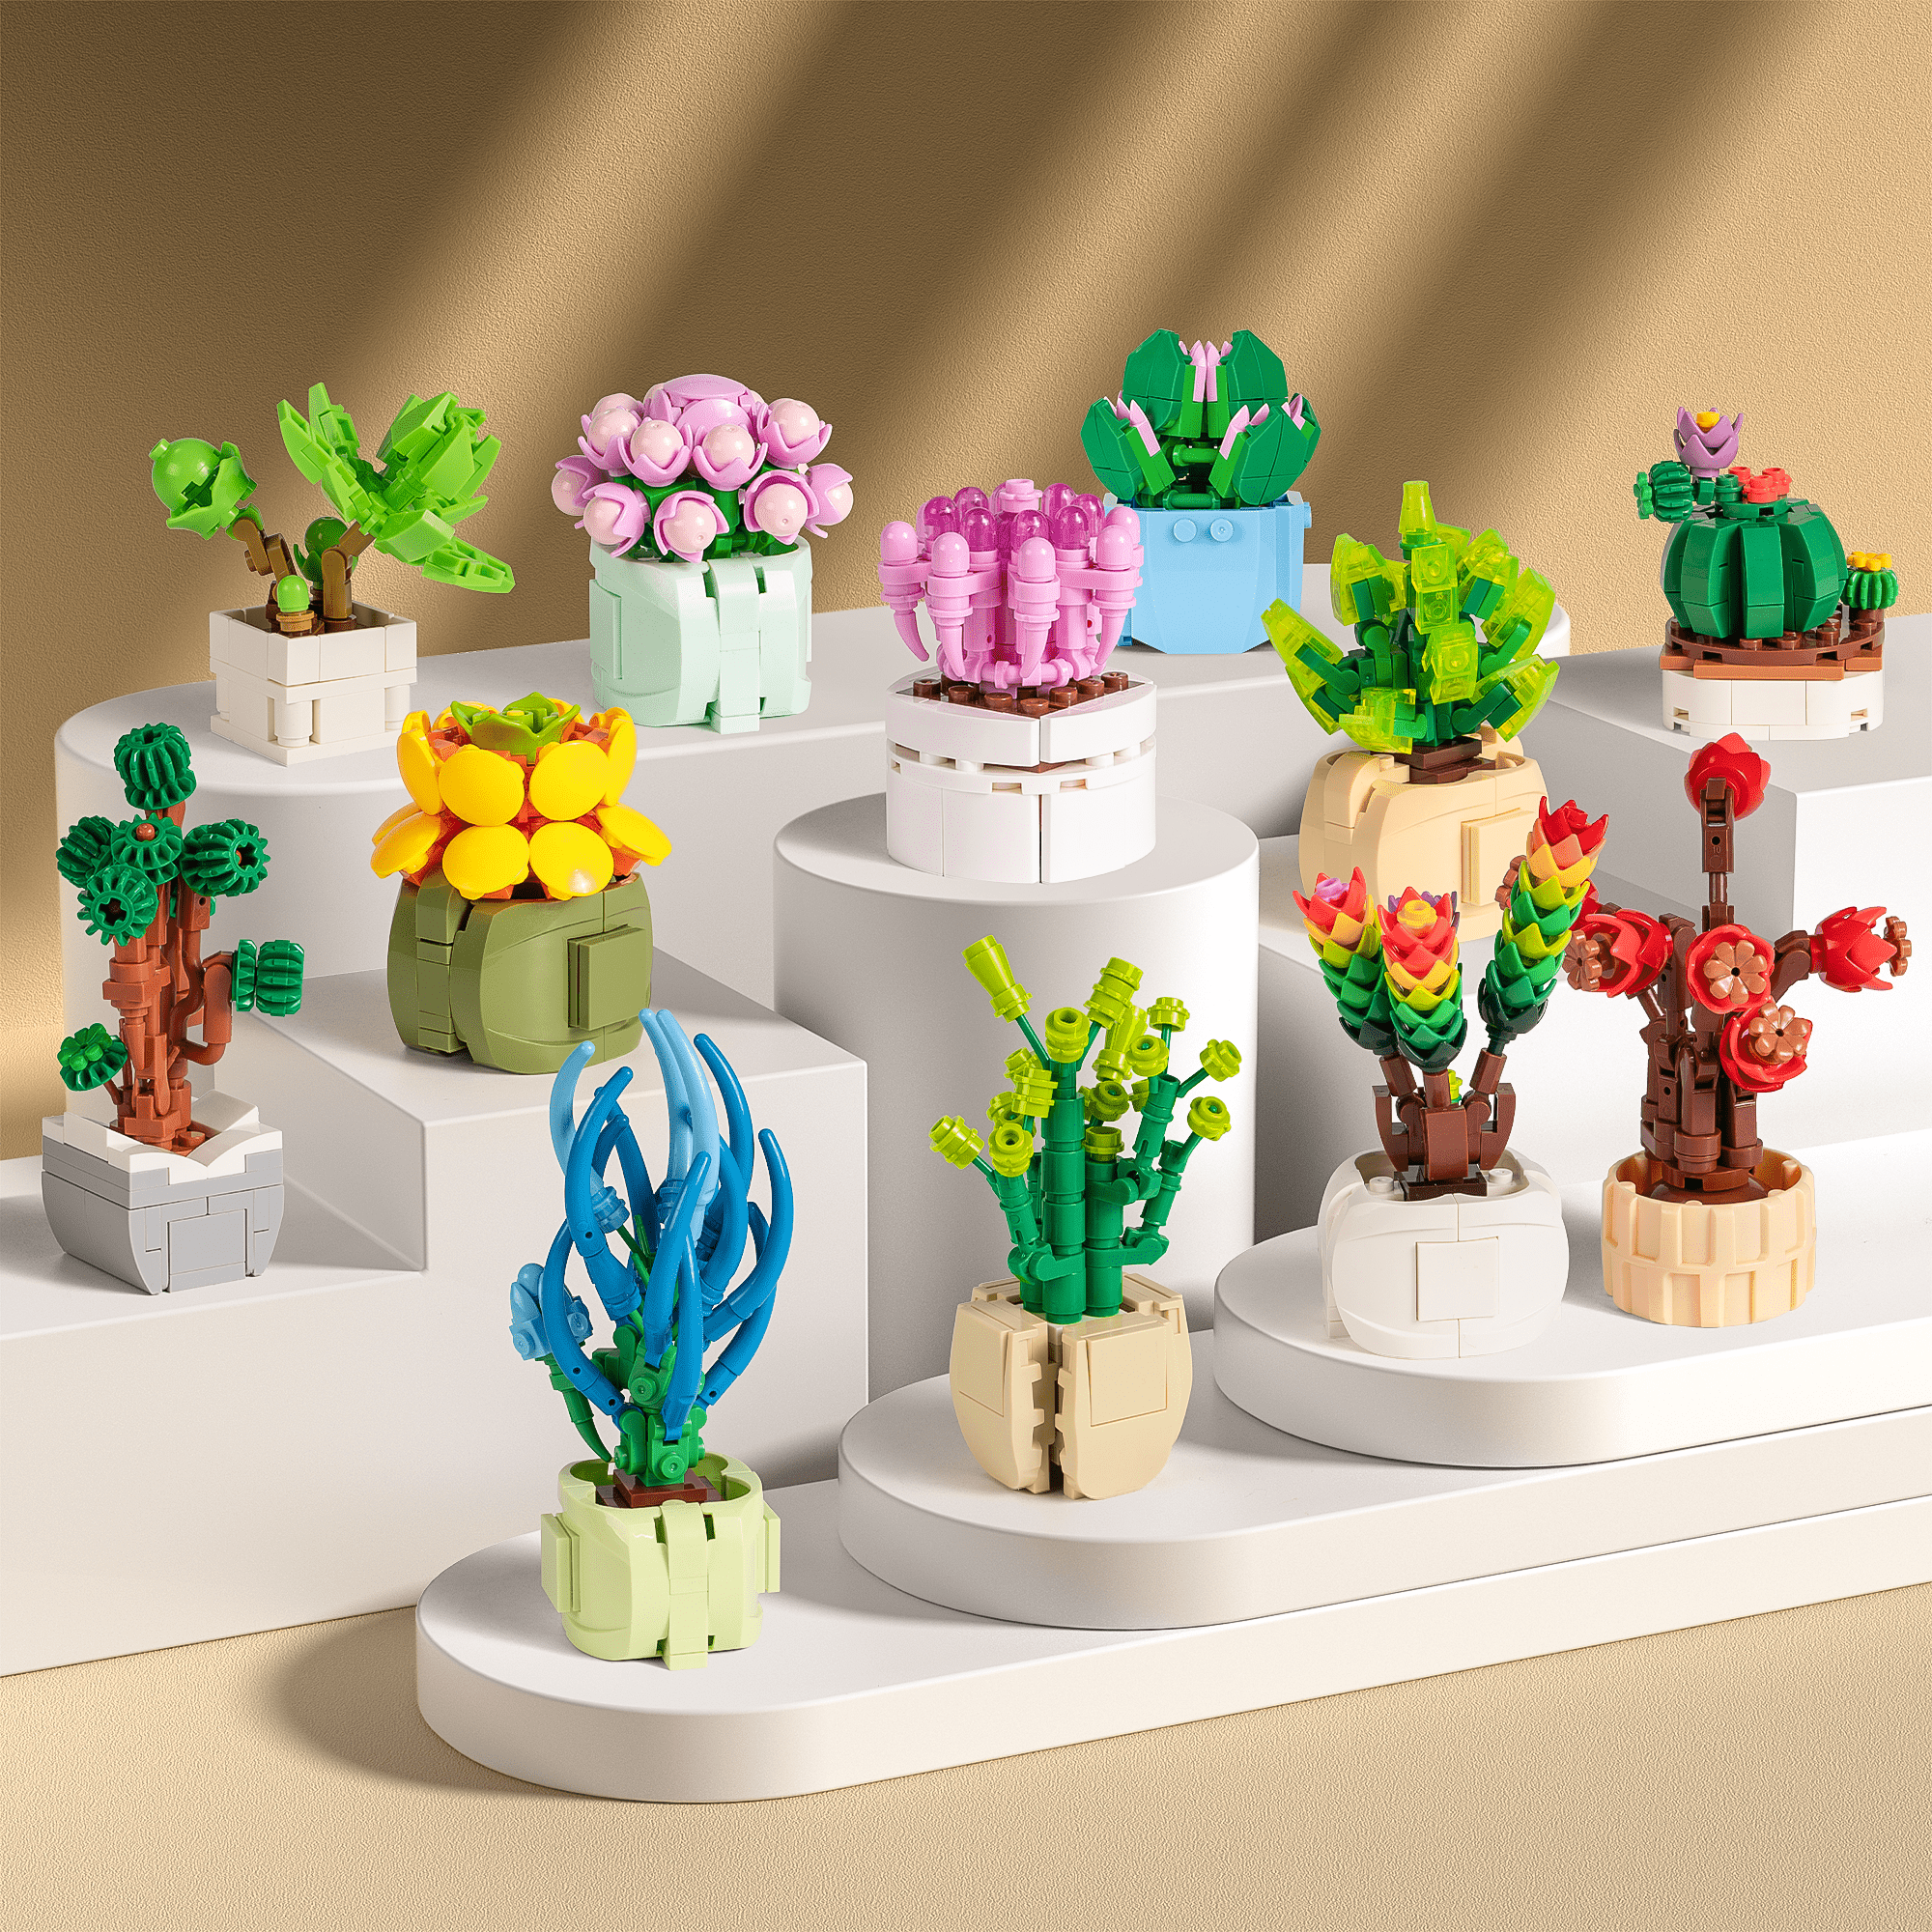 Succulents Building Sets Series, Office Decor Display, Bricks Bonsai Model DIY Gifts for Friends